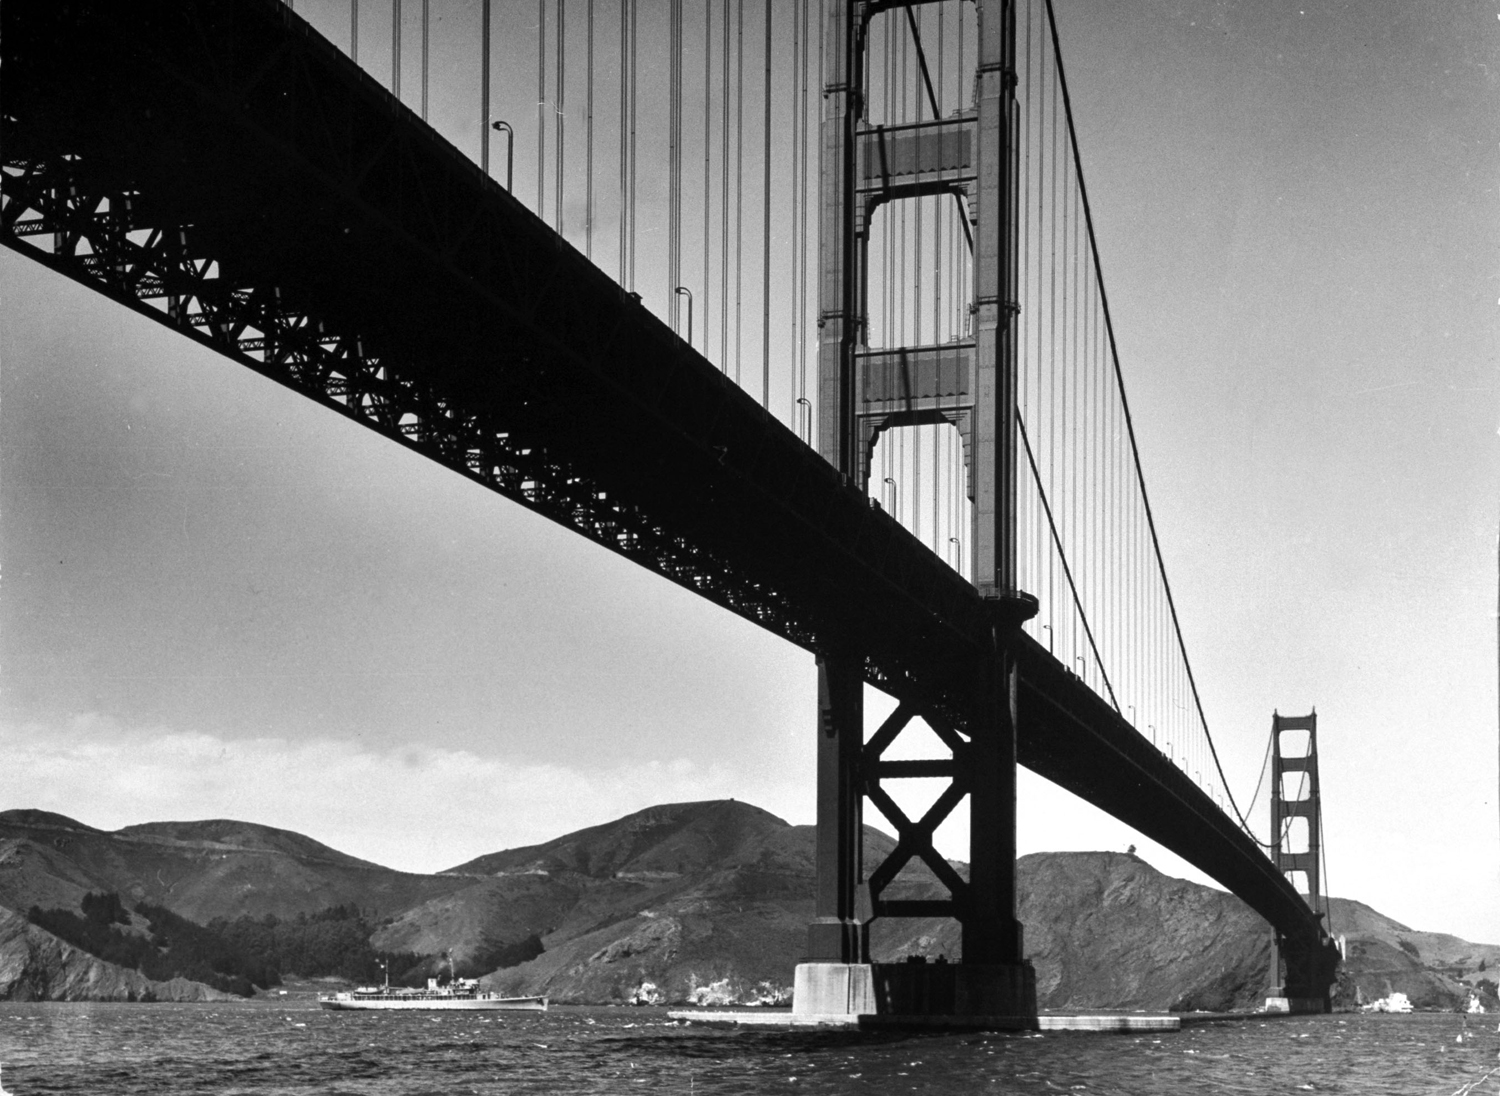 View of the Golden Gate Bridge toward the hills of Marin County, 1955.